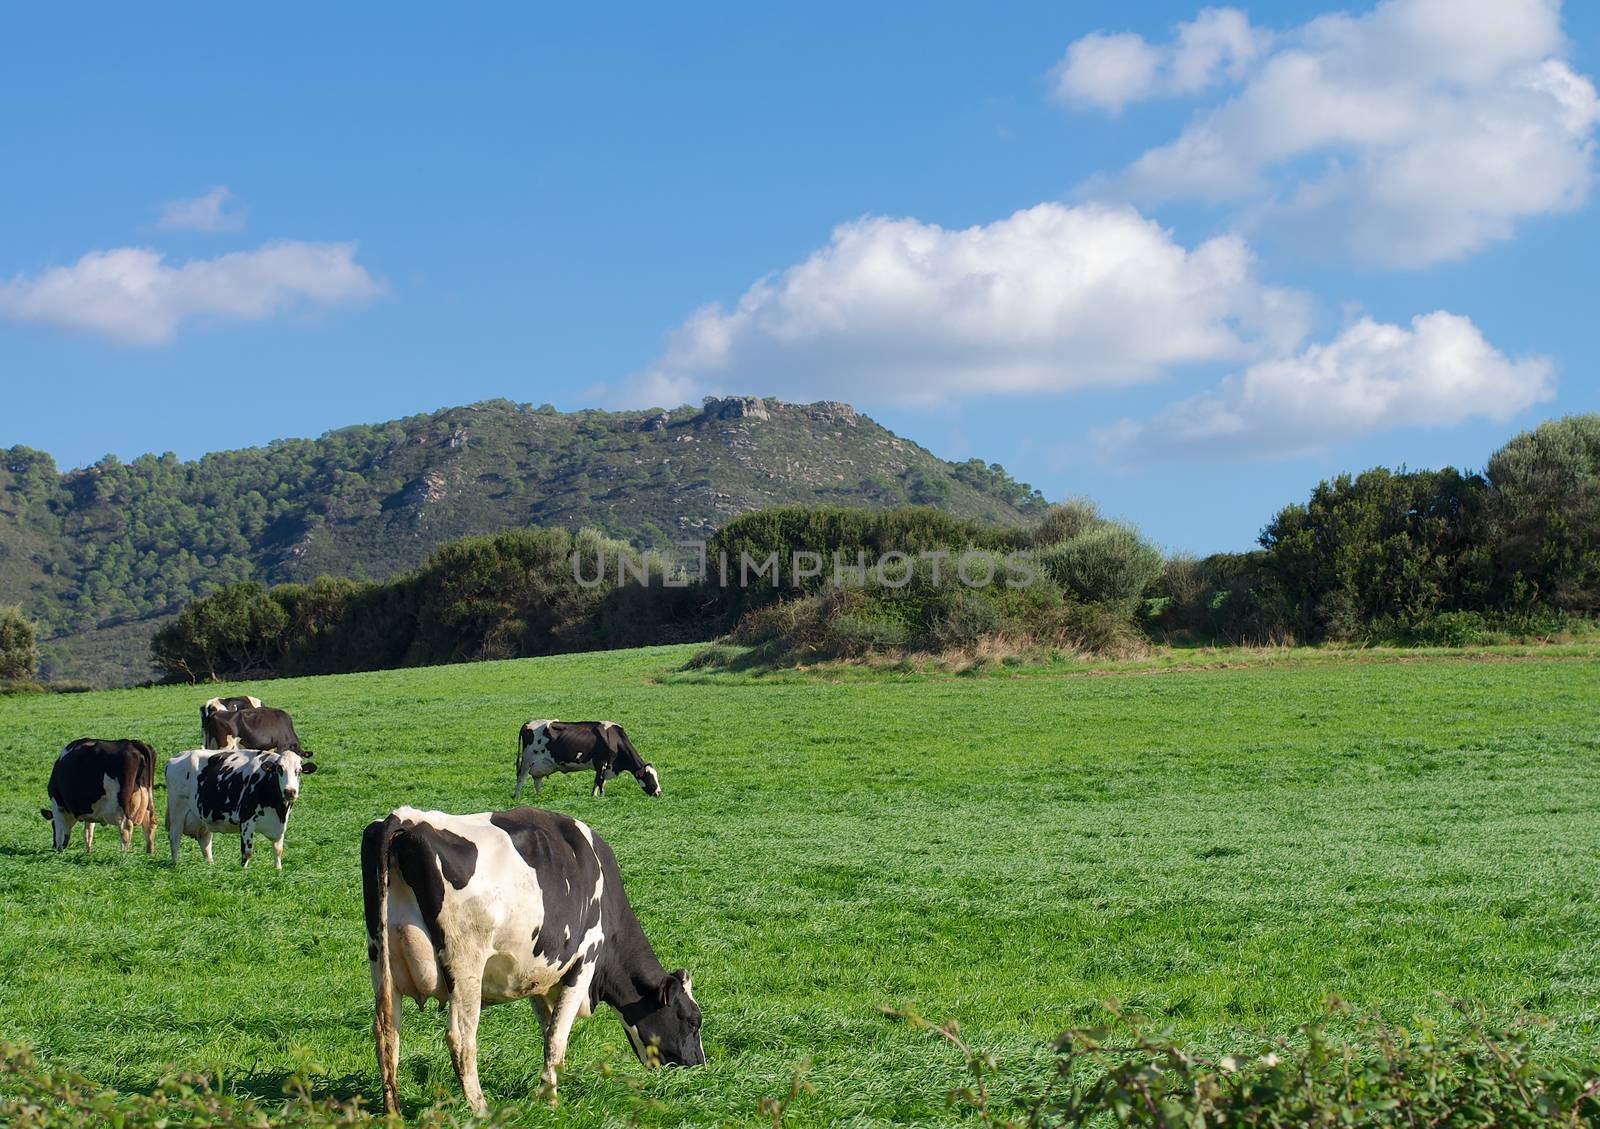 Herd of Funny Spotted Black and White Cows on Green Pasture Meadow on Blue Sky background Outdoors